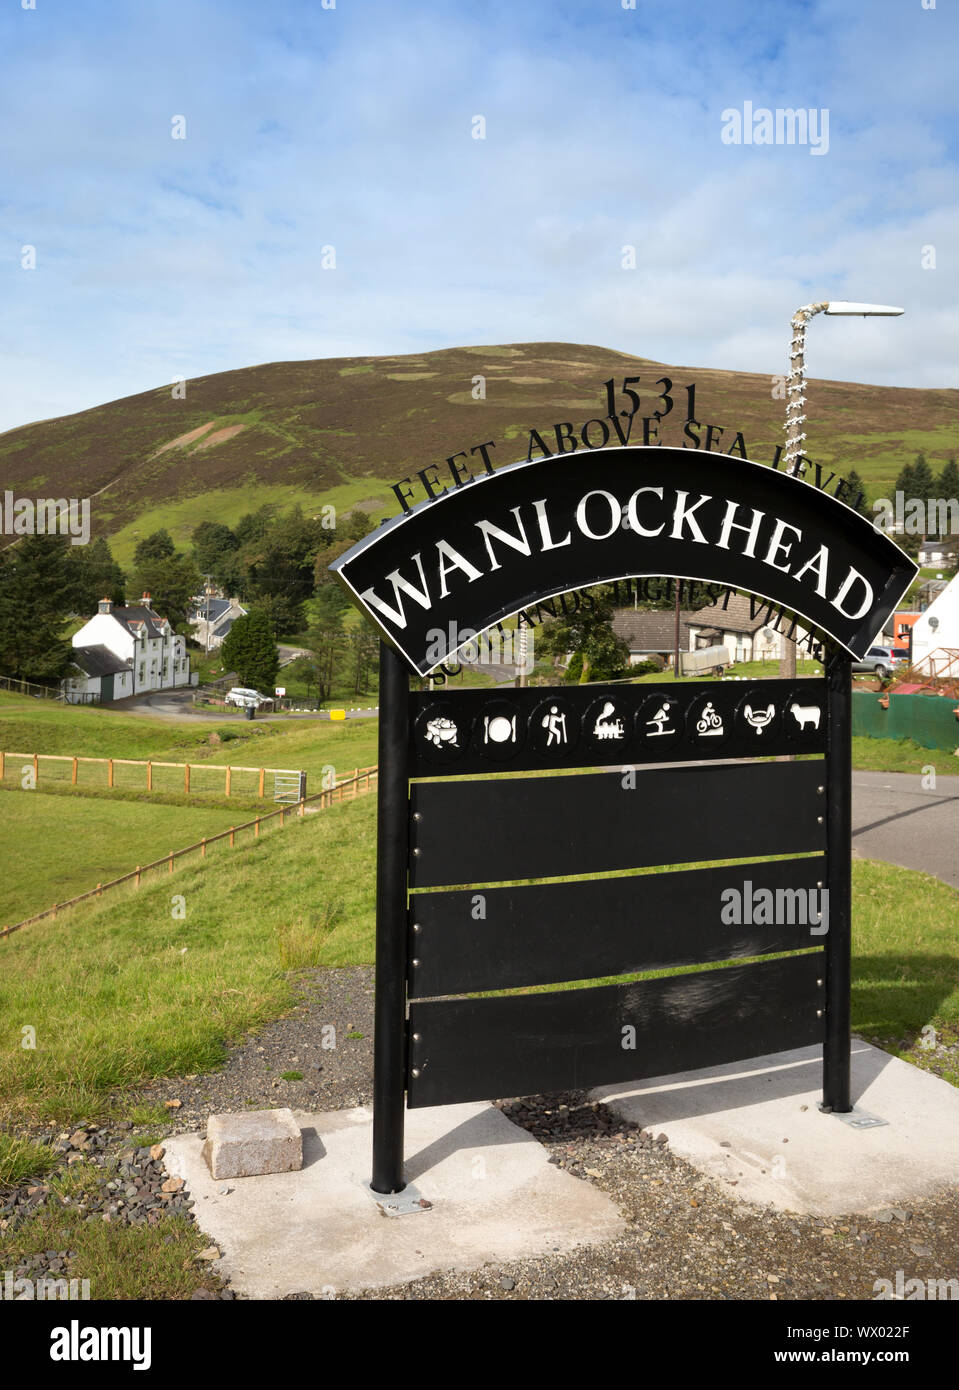 Wanlockhead the highest village in Scotland and the UK at 1531 feet above sea level Stock Photo